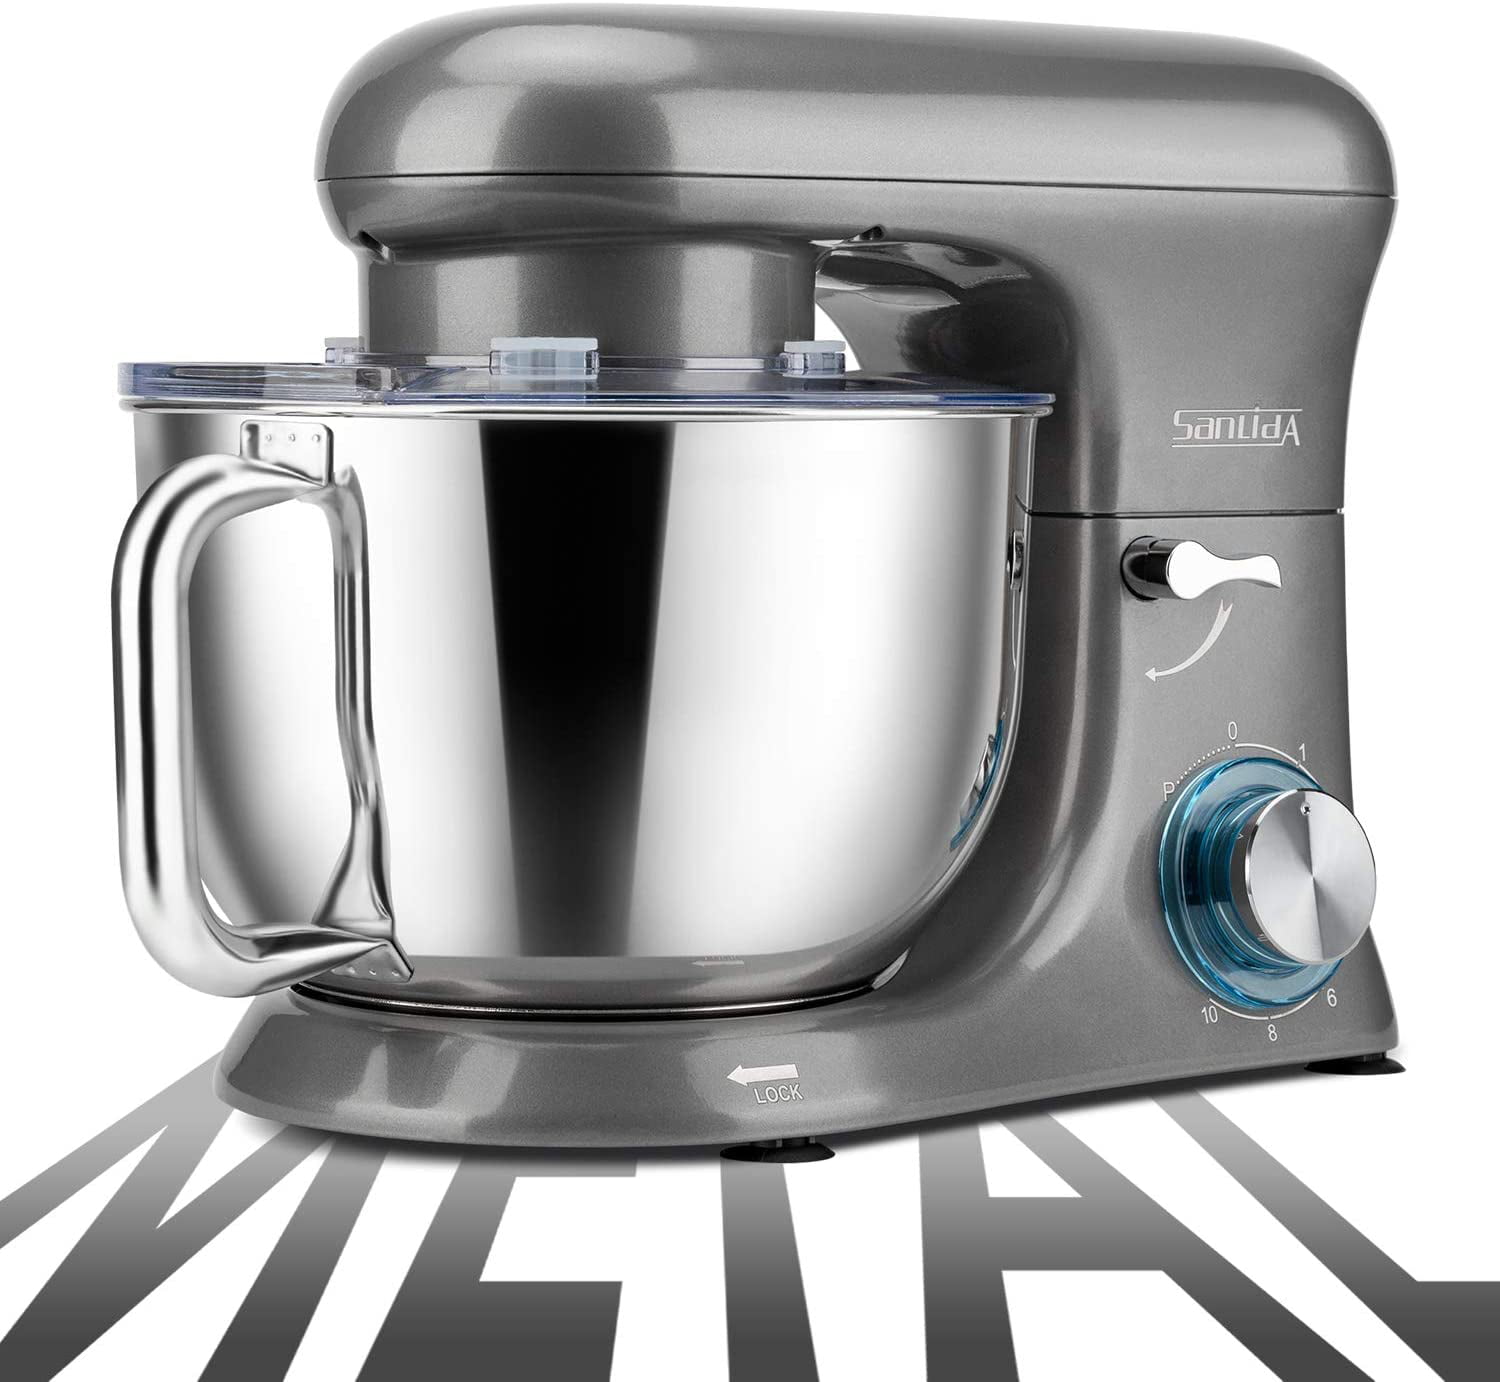 Pearl Grey SanLidA All-Metal Stand Mixer 6.5 Qt SM-1515 10-Speed Electric Kitchen Mixer with Dishwasher-Safe Dough Hooks Flat Beaters Wire Whip & Pouring Shield Attachments for Most Home Cooks 